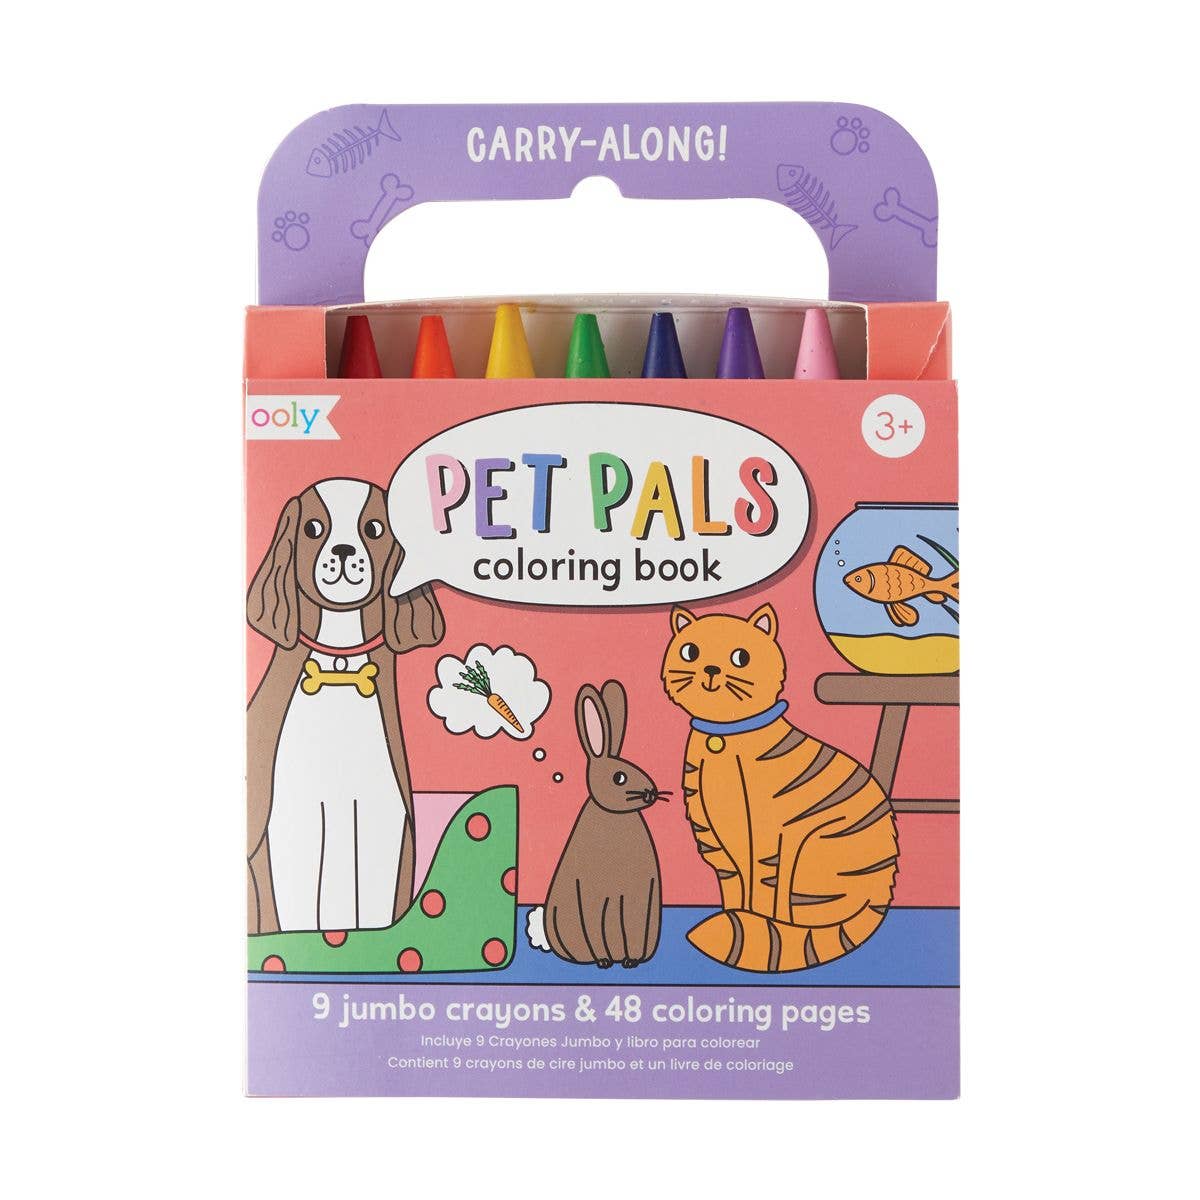 Carry Along Crayon & Coloring Book Kit-Pet Pals - Twinkle Twinkle Little One